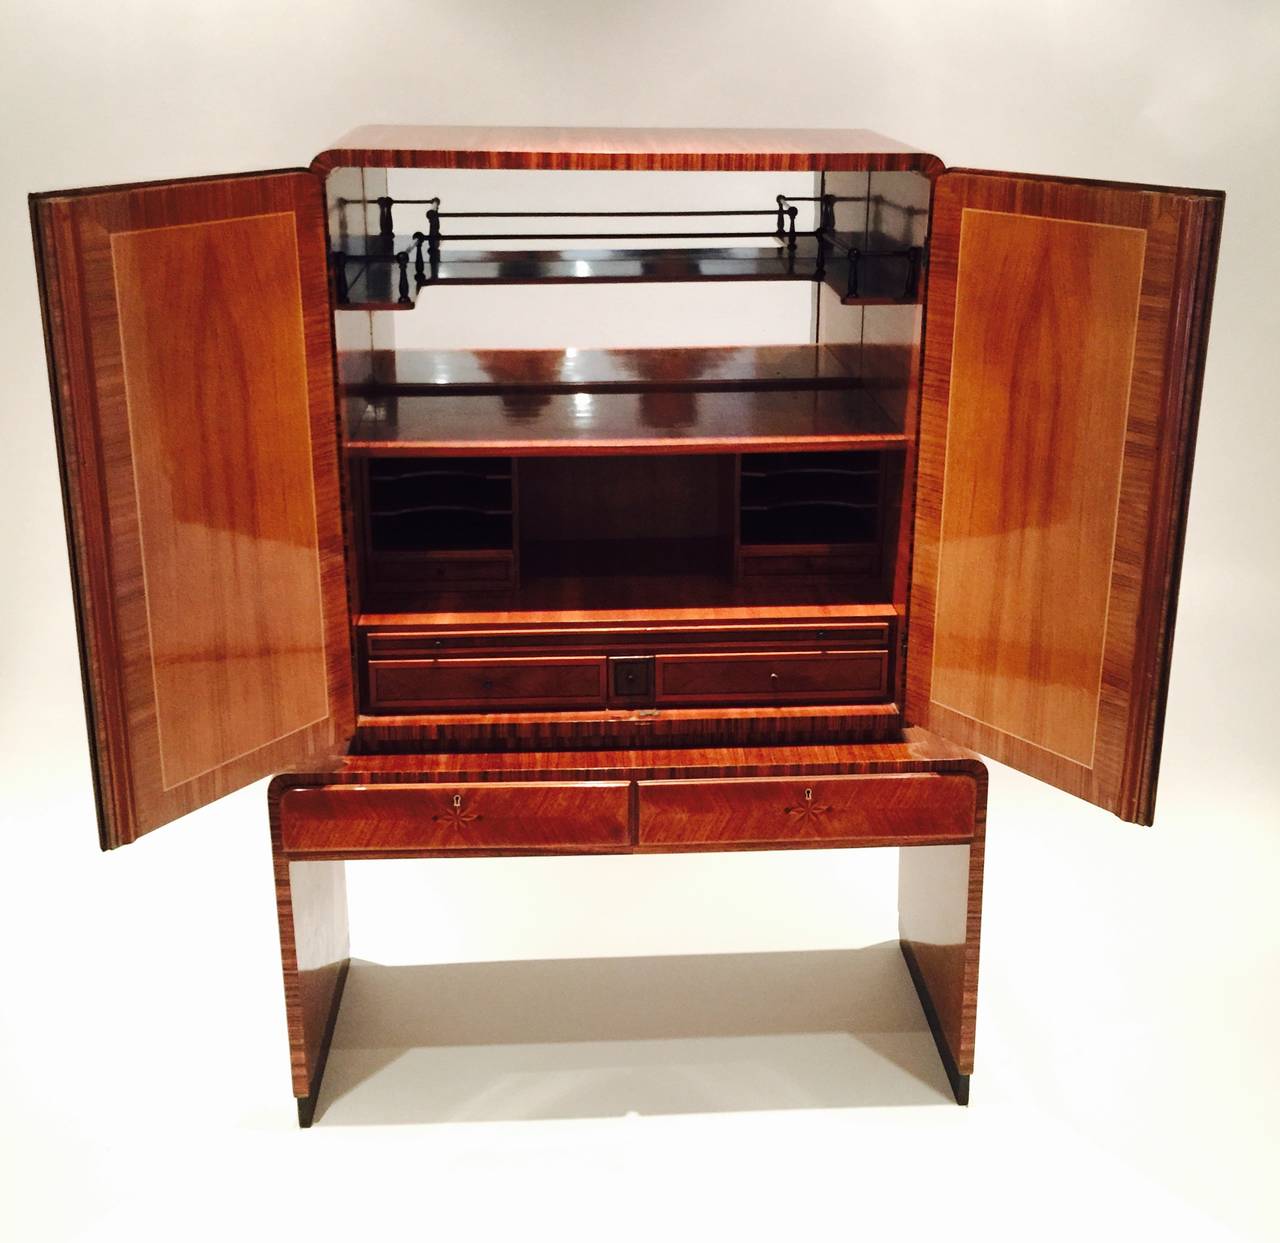 Secretaire or Dry Bar with Parquetry Veneered Doors In Good Condition For Sale In Los Angeles, CA